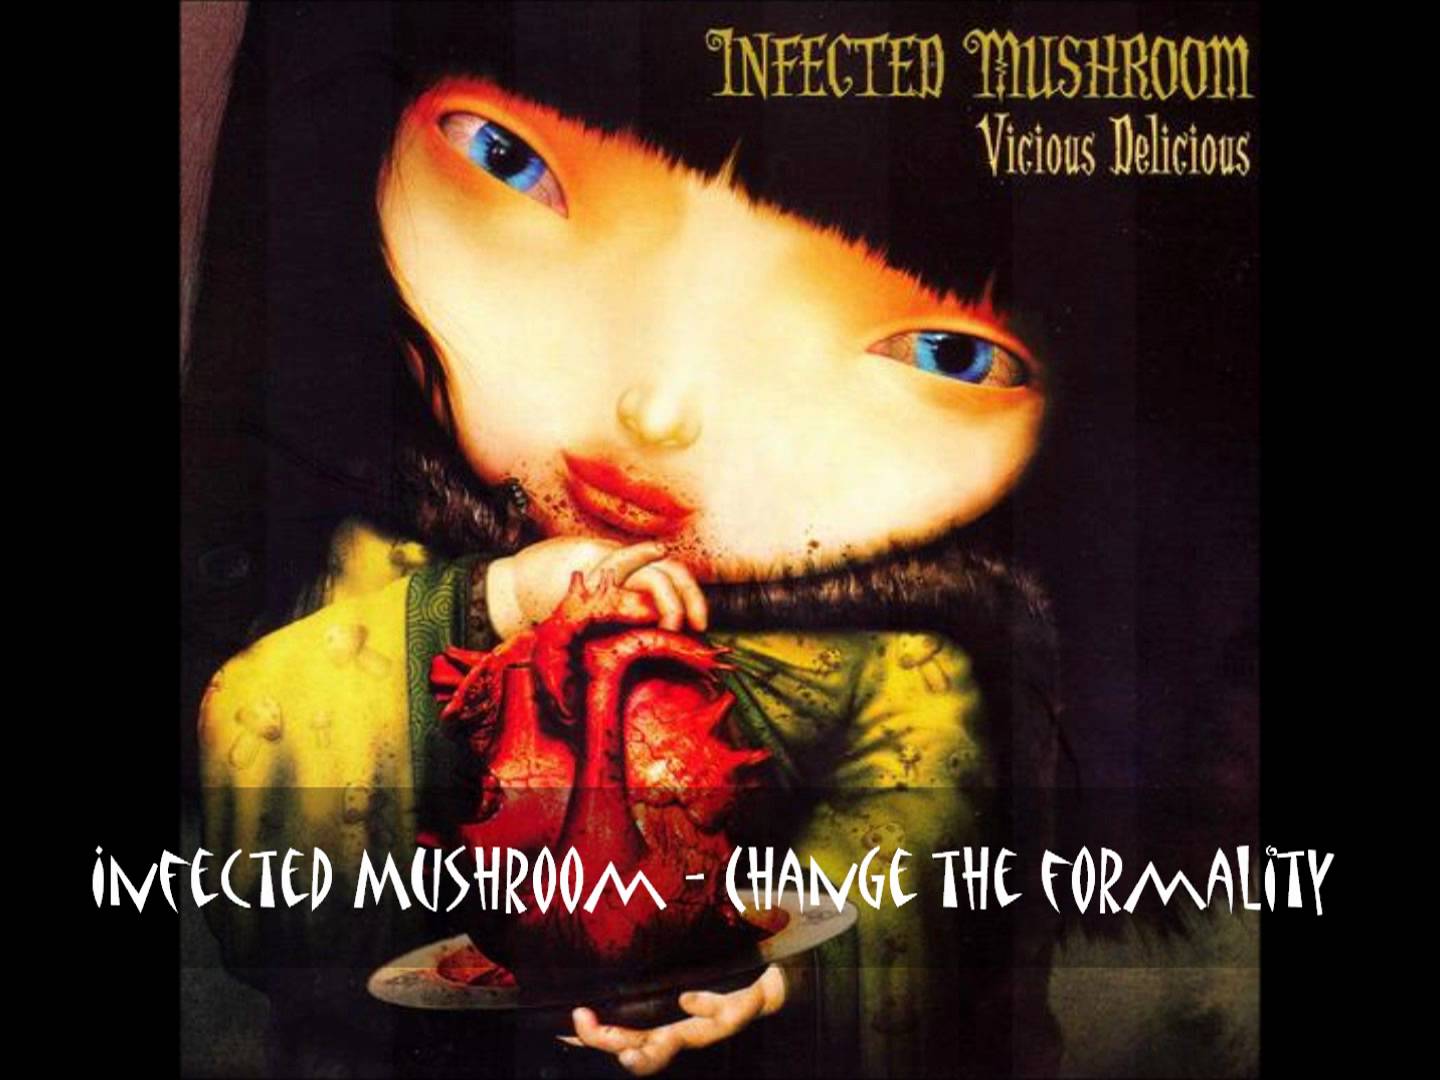 Infected Mushroom - Change the Formality